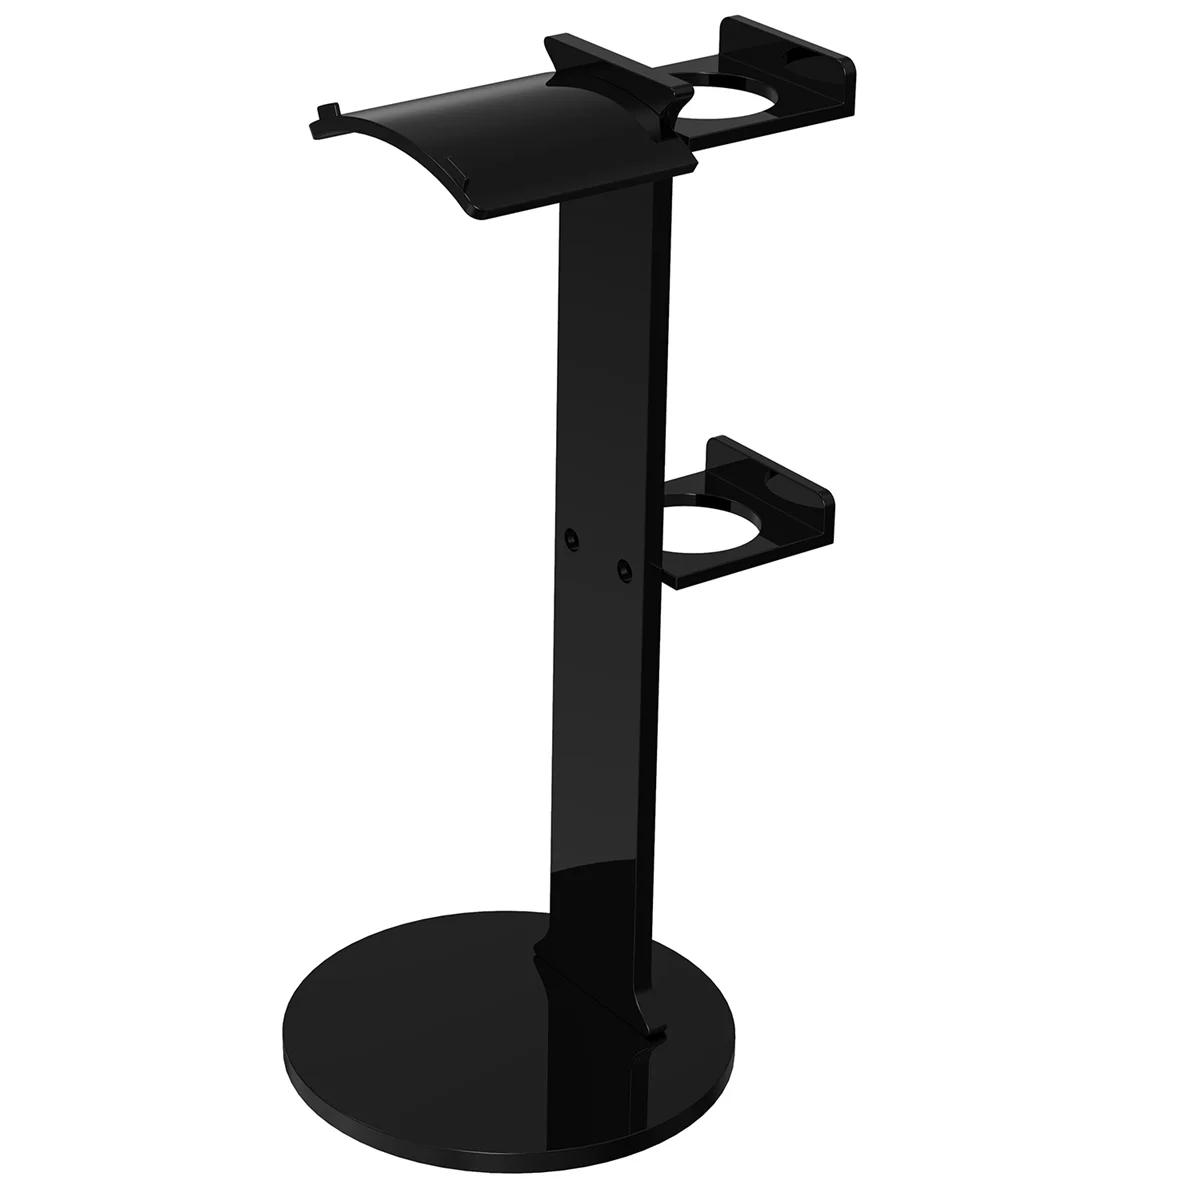 

VR Stand Headset Display Stand for Meta Quest 2 Pico 4 Quest Pro VR Devices Accessories,Black